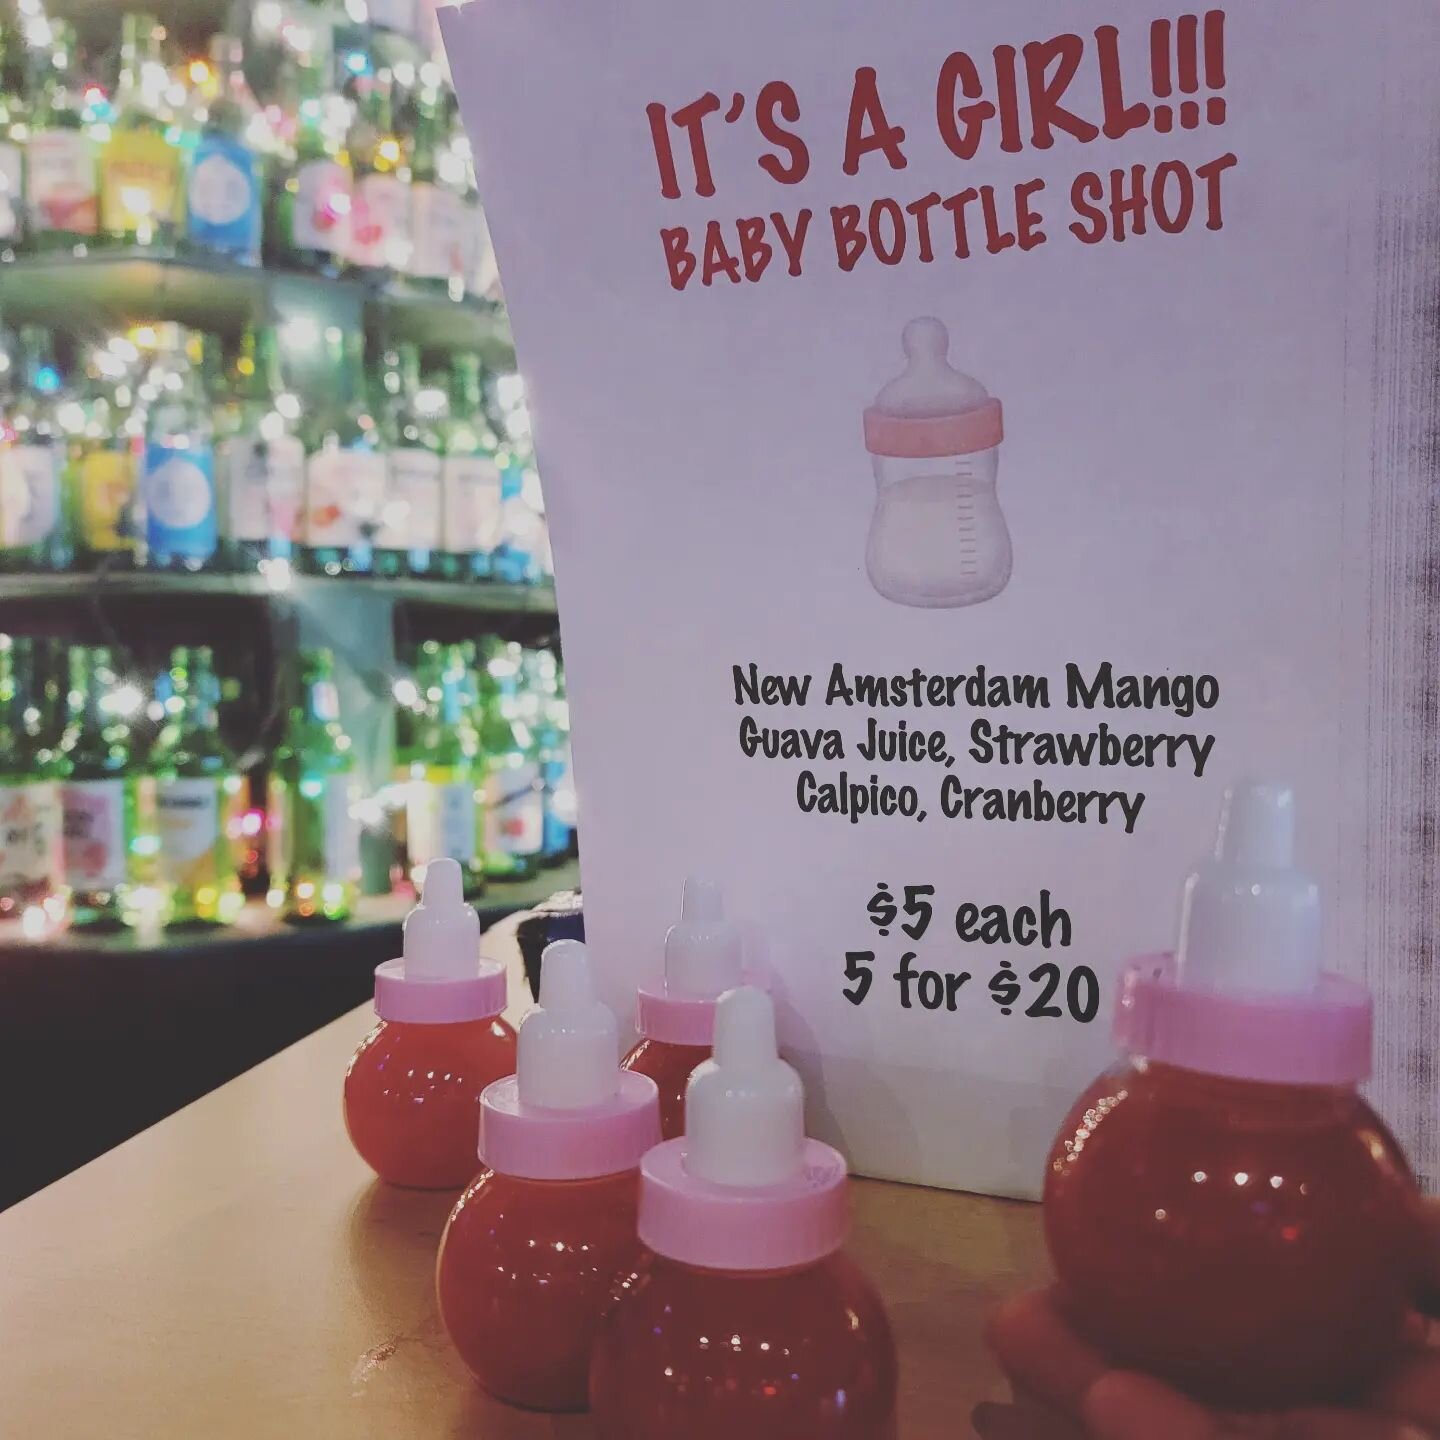 One of our K-FAM members had a baby girl! Cheers to our latest addition! Celebrate with us and try this limited time shot special!!! 21 and over only!

*****

@kingstonscuisine will be repping the K-HOUSE Karaoke Lounge &amp; Suites Tiny Kitchen Thur